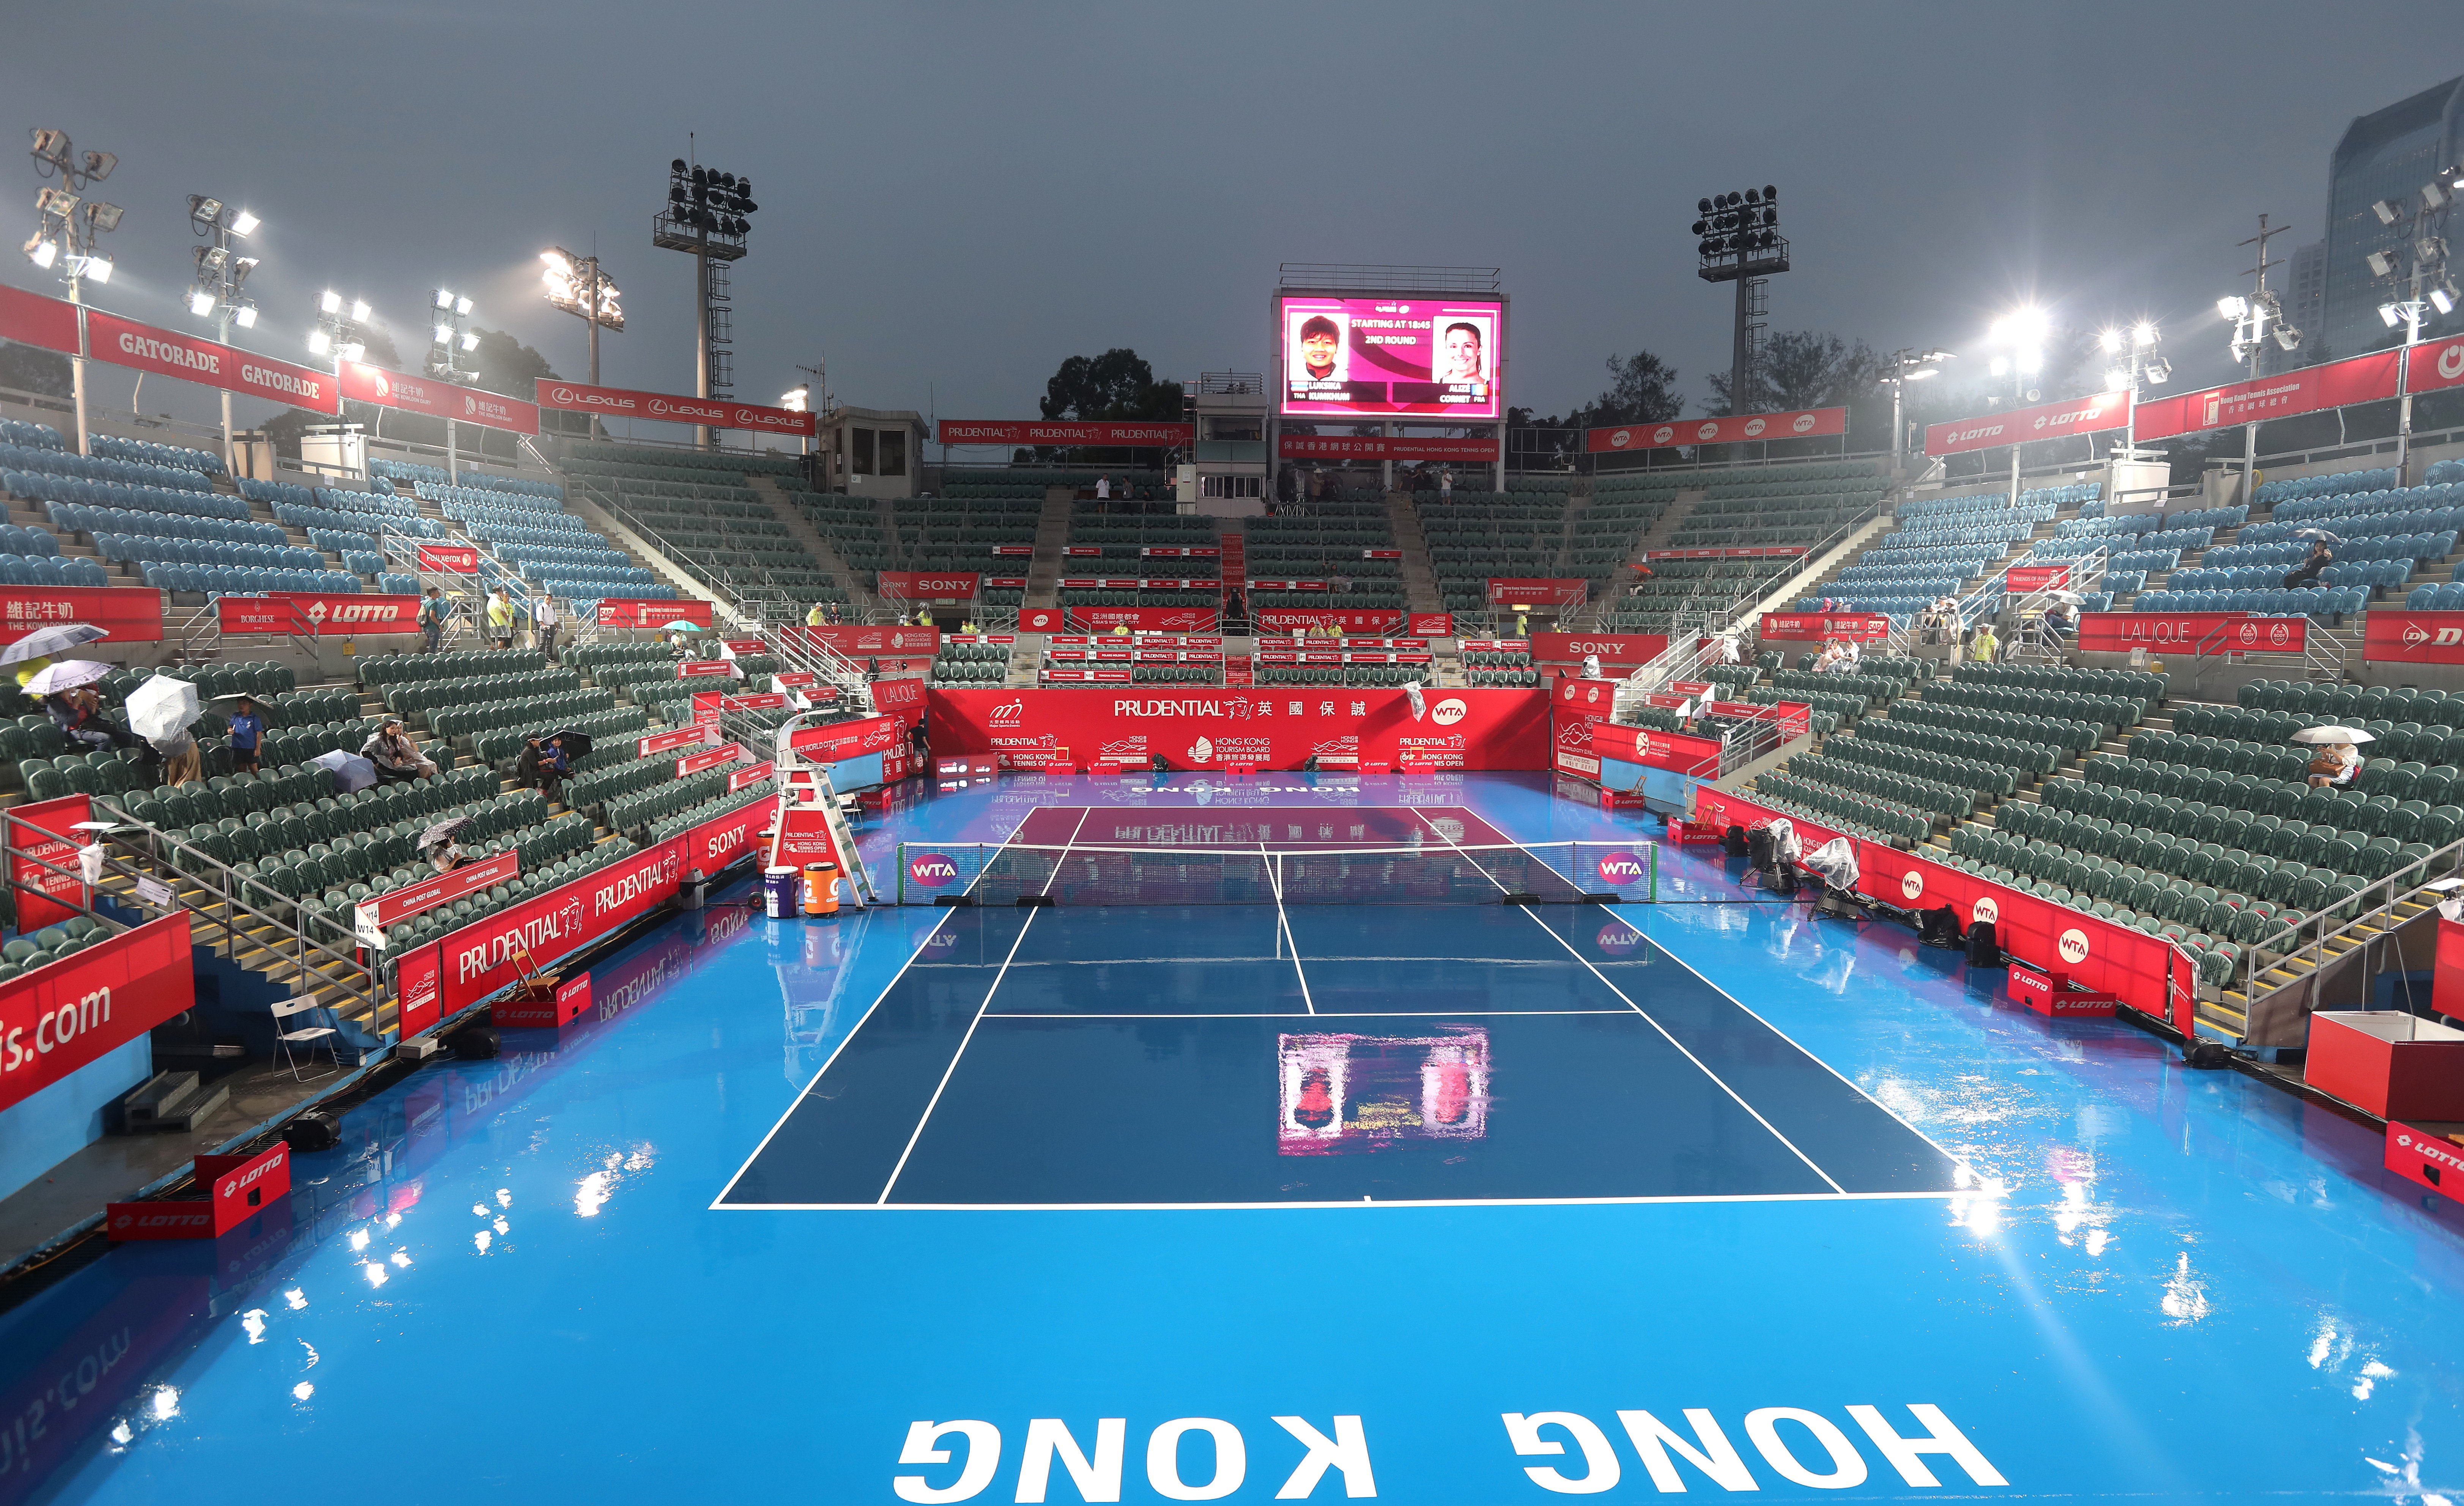 A view of a wet Victoria Park Tennis Stadium in Causeway Bay, after a rainy Wednesday at the Prudential Hong Kong Tennis Open. Photo: Xiaomei Chen